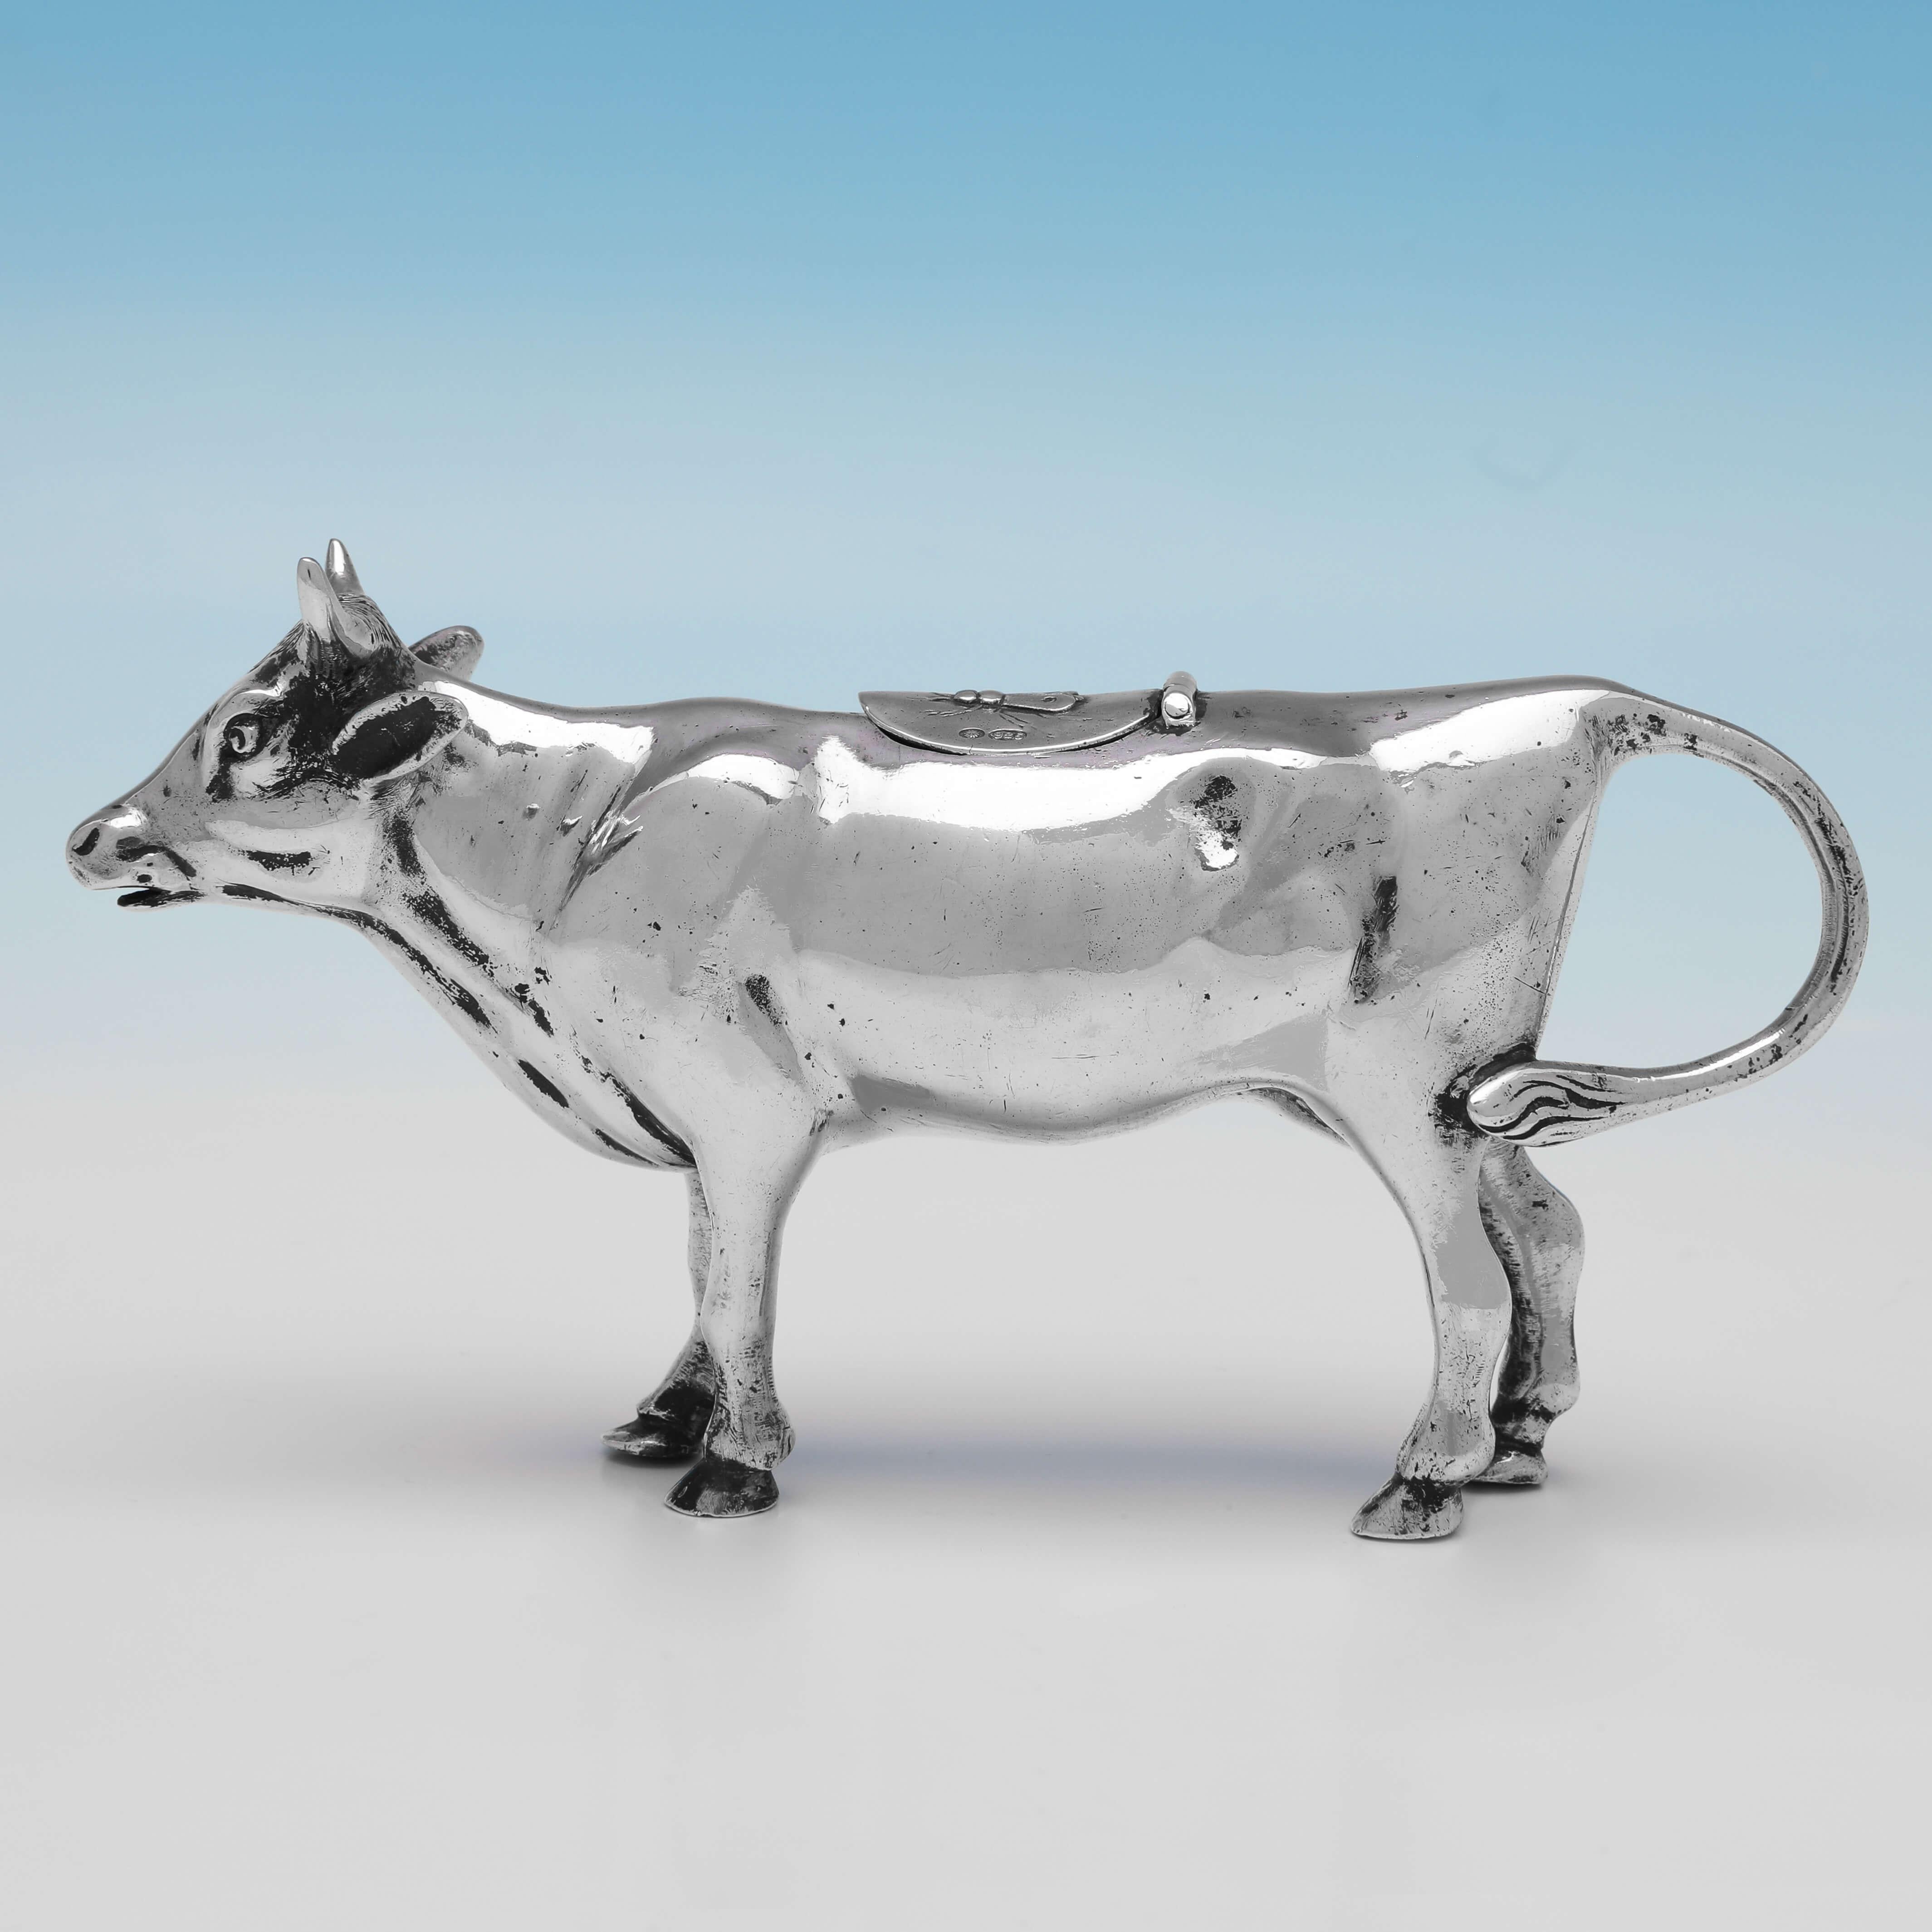 Carrying import marks for London in 1905 by John George Piddington, this handsome, Edwardian, Antique Sterling Silver Cow Creamer is well modelled, measuring 3